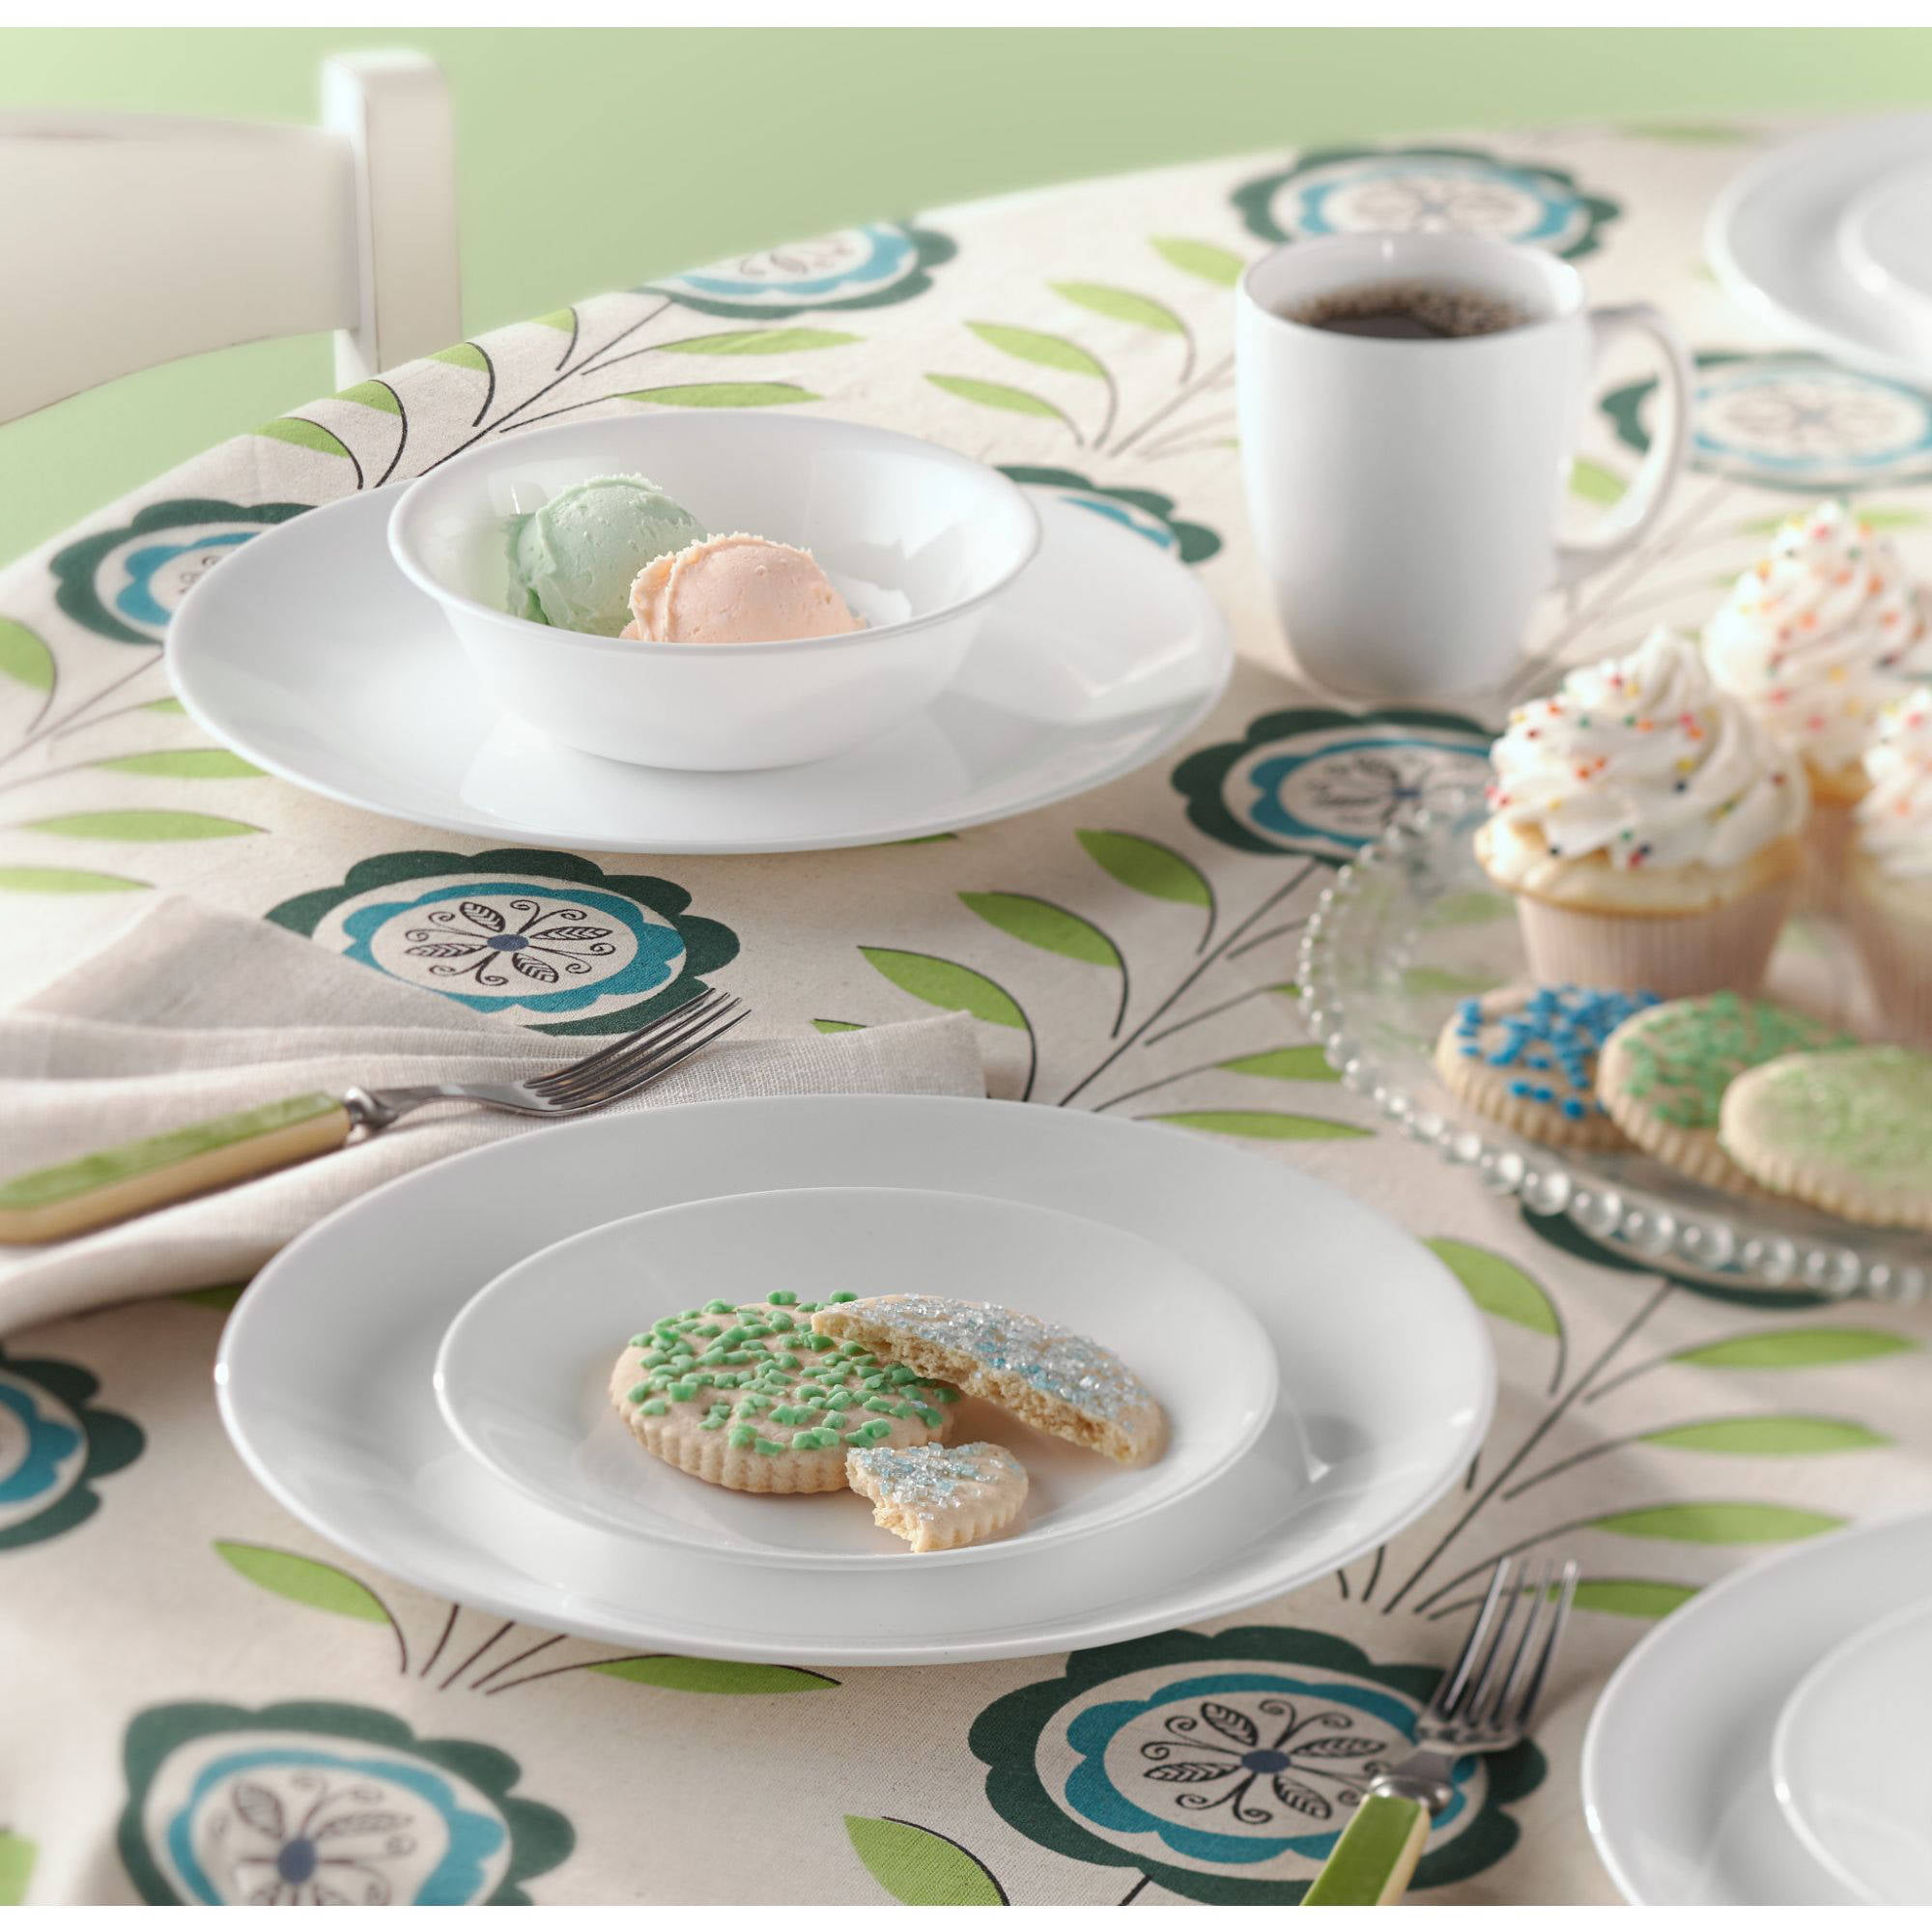 Are Corelle dinnerware clearance sales common?